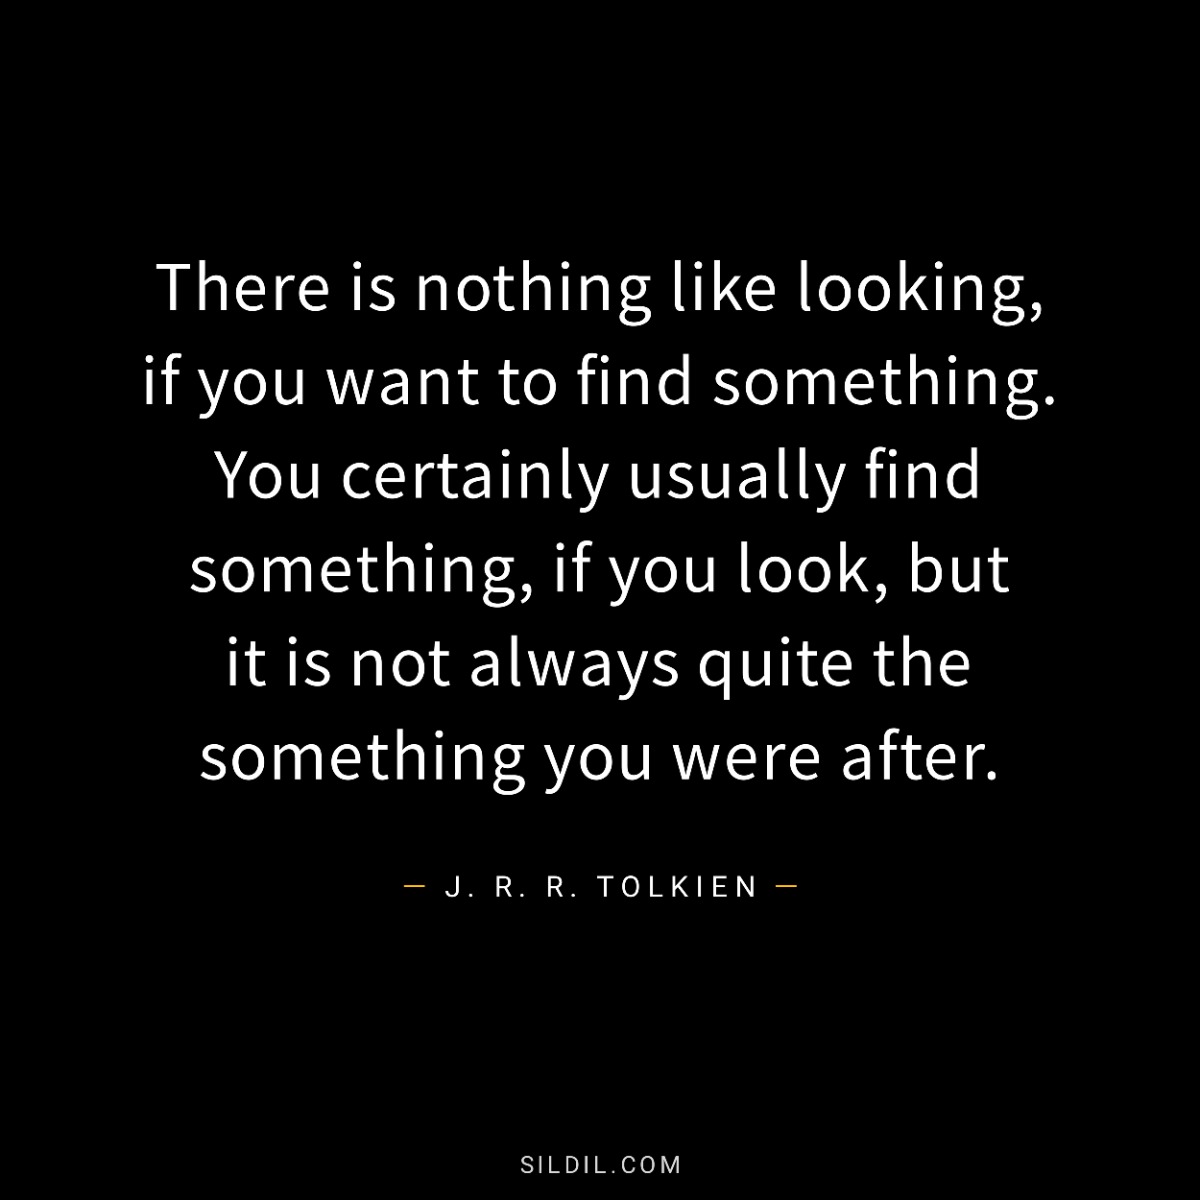 There is nothing like looking, if you want to find something. You certainly usually find something, if you look, but it is not always quite the something you were after.